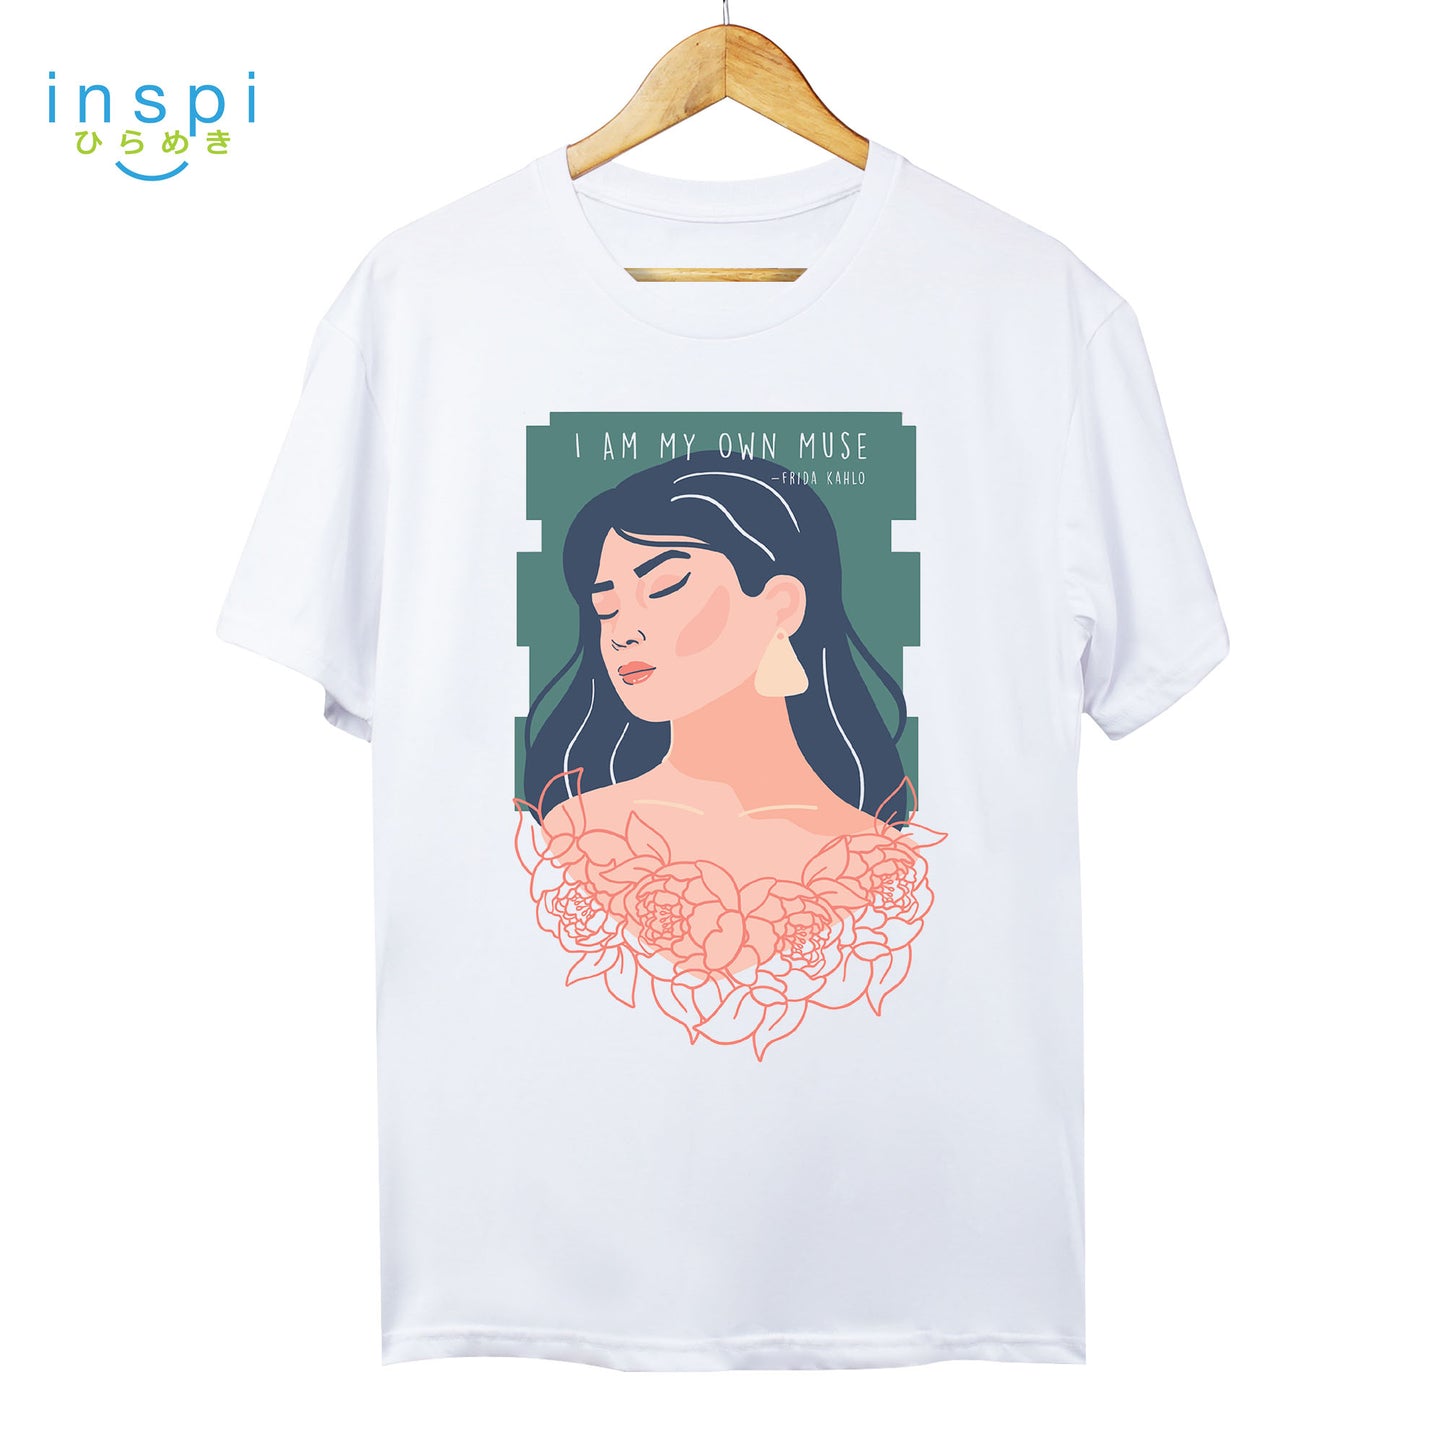 INSPI Tees Ladies Loose Fit I Am My Own Muse Graphic Tshirt